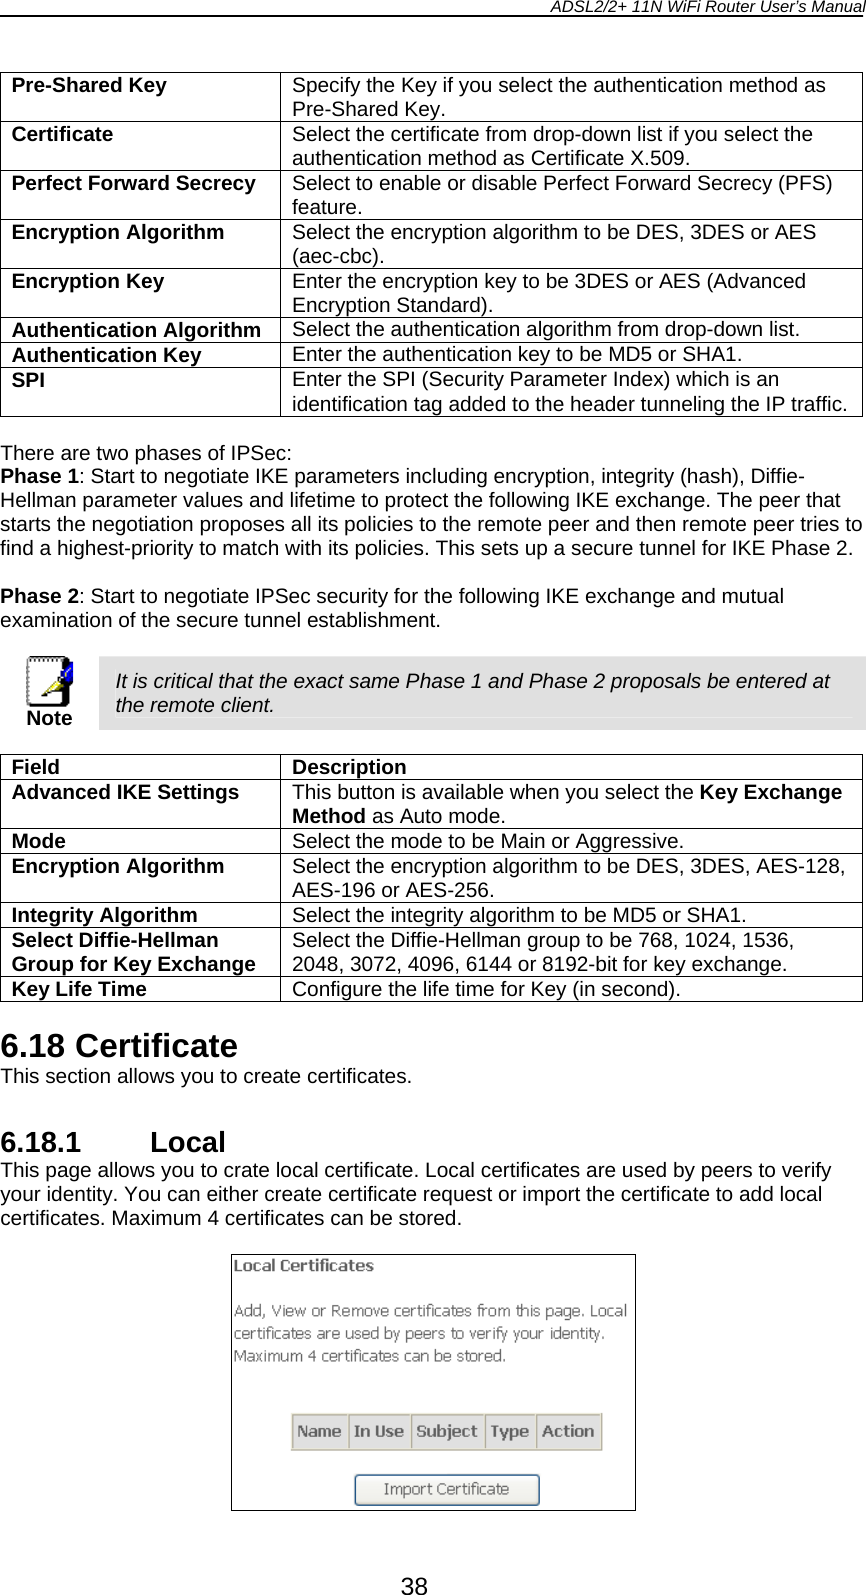 ADSL2/2+ 11N WiFi Router User’s Manual  38 Pre-Shared Key  Specify the Key if you select the authentication method as Pre-Shared Key. Certificate  Select the certificate from drop-down list if you select the authentication method as Certificate X.509. Perfect Forward Secrecy  Select to enable or disable Perfect Forward Secrecy (PFS) feature. Encryption Algorithm  Select the encryption algorithm to be DES, 3DES or AES (aec-cbc). Encryption Key  Enter the encryption key to be 3DES or AES (Advanced Encryption Standard). Authentication Algorithm  Select the authentication algorithm from drop-down list. Authentication Key  Enter the authentication key to be MD5 or SHA1. SPI  Enter the SPI (Security Parameter Index) which is an identification tag added to the header tunneling the IP traffic. There are two phases of IPSec: Phase 1: Start to negotiate IKE parameters including encryption, integrity (hash), Diffie-Hellman parameter values and lifetime to protect the following IKE exchange. The peer that starts the negotiation proposes all its policies to the remote peer and then remote peer tries to find a highest-priority to match with its policies. This sets up a secure tunnel for IKE Phase 2.  Phase 2: Start to negotiate IPSec security for the following IKE exchange and mutual examination of the secure tunnel establishment.   Note It is critical that the exact same Phase 1 and Phase 2 proposals be entered at the remote client.  Field Description Advanced IKE Settings  This button is available when you select the Key Exchange Method as Auto mode.  Mode  Select the mode to be Main or Aggressive. Encryption Algorithm  Select the encryption algorithm to be DES, 3DES, AES-128, AES-196 or AES-256. Integrity Algorithm  Select the integrity algorithm to be MD5 or SHA1. Select Diffie-Hellman Group for Key Exchange  Select the Diffie-Hellman group to be 768, 1024, 1536, 2048, 3072, 4096, 6144 or 8192-bit for key exchange. Key Life Time  Configure the life time for Key (in second).  6.18 Certificate This section allows you to create certificates.  6.18.1 Local This page allows you to crate local certificate. Local certificates are used by peers to verify your identity. You can either create certificate request or import the certificate to add local certificates. Maximum 4 certificates can be stored.   